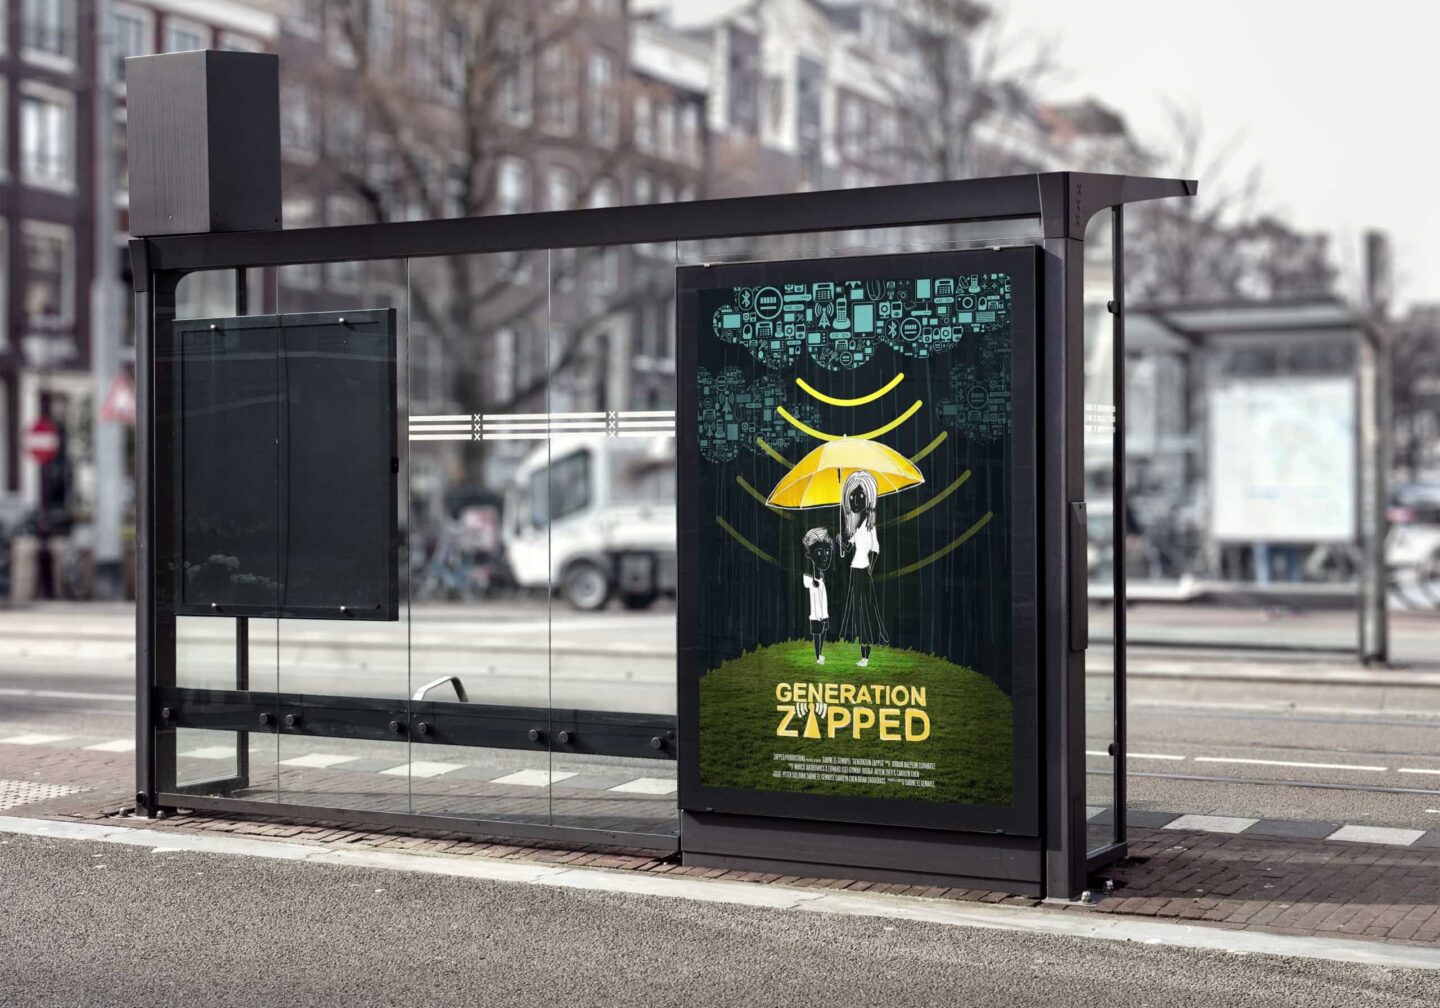 Generation zapped billboard on a bus stop